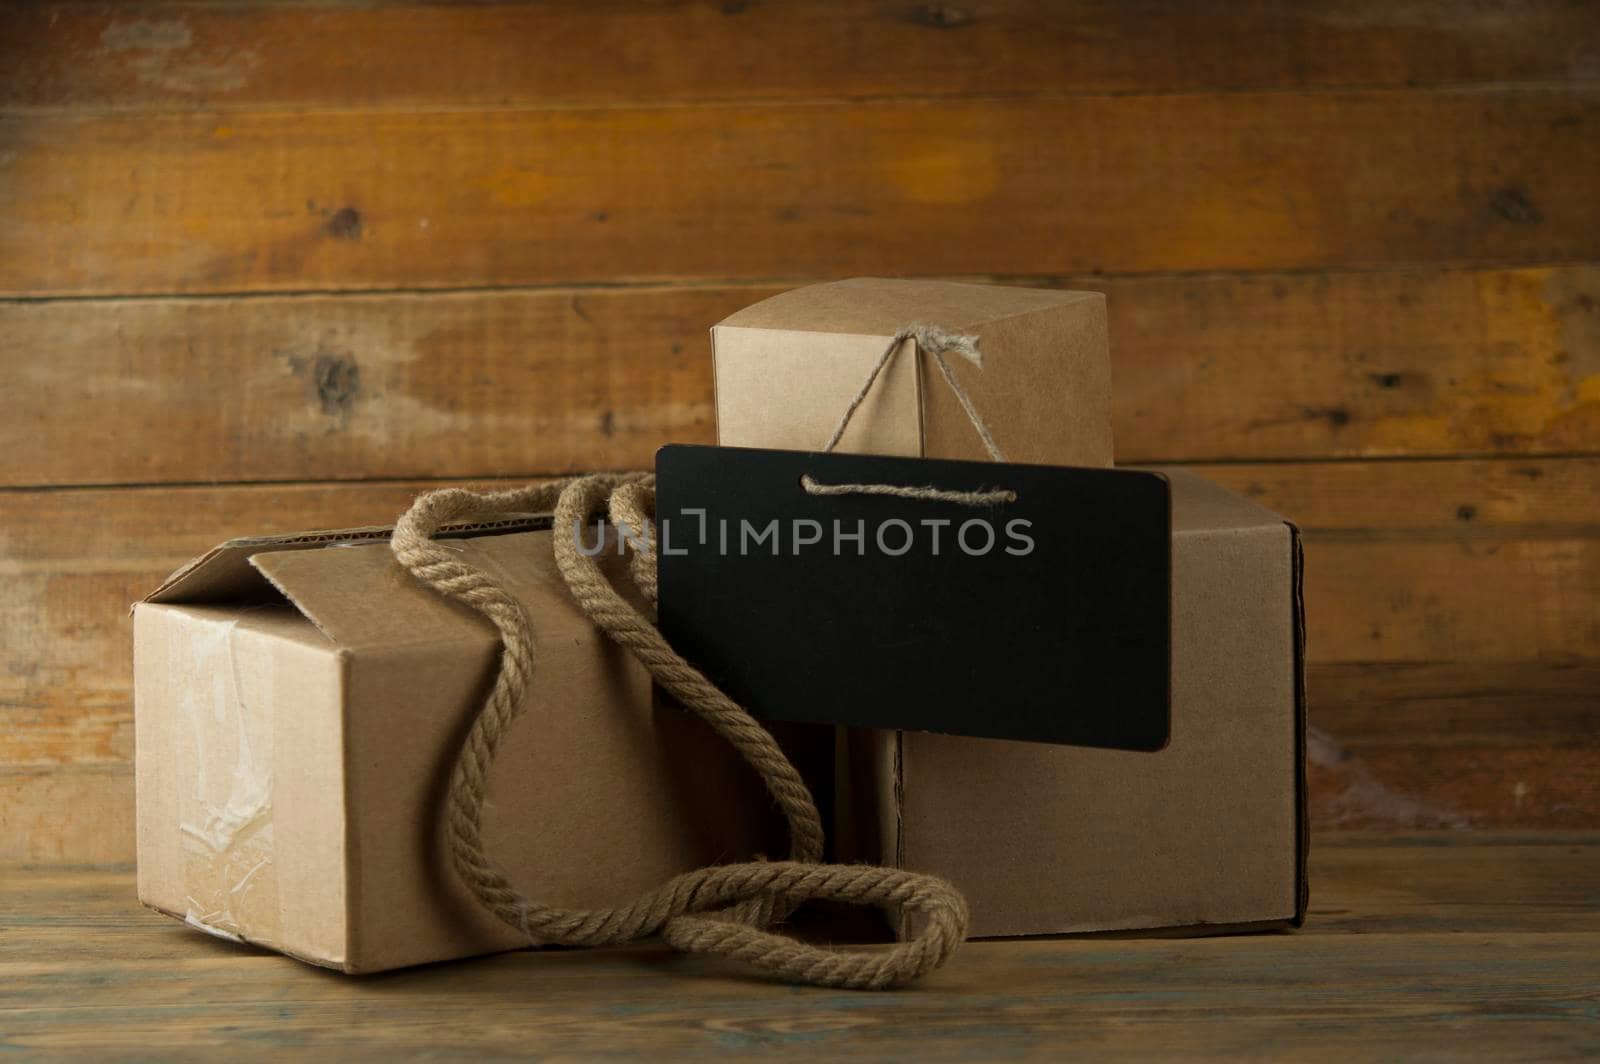 Pile cardboard boxes on a wooden background by inxti